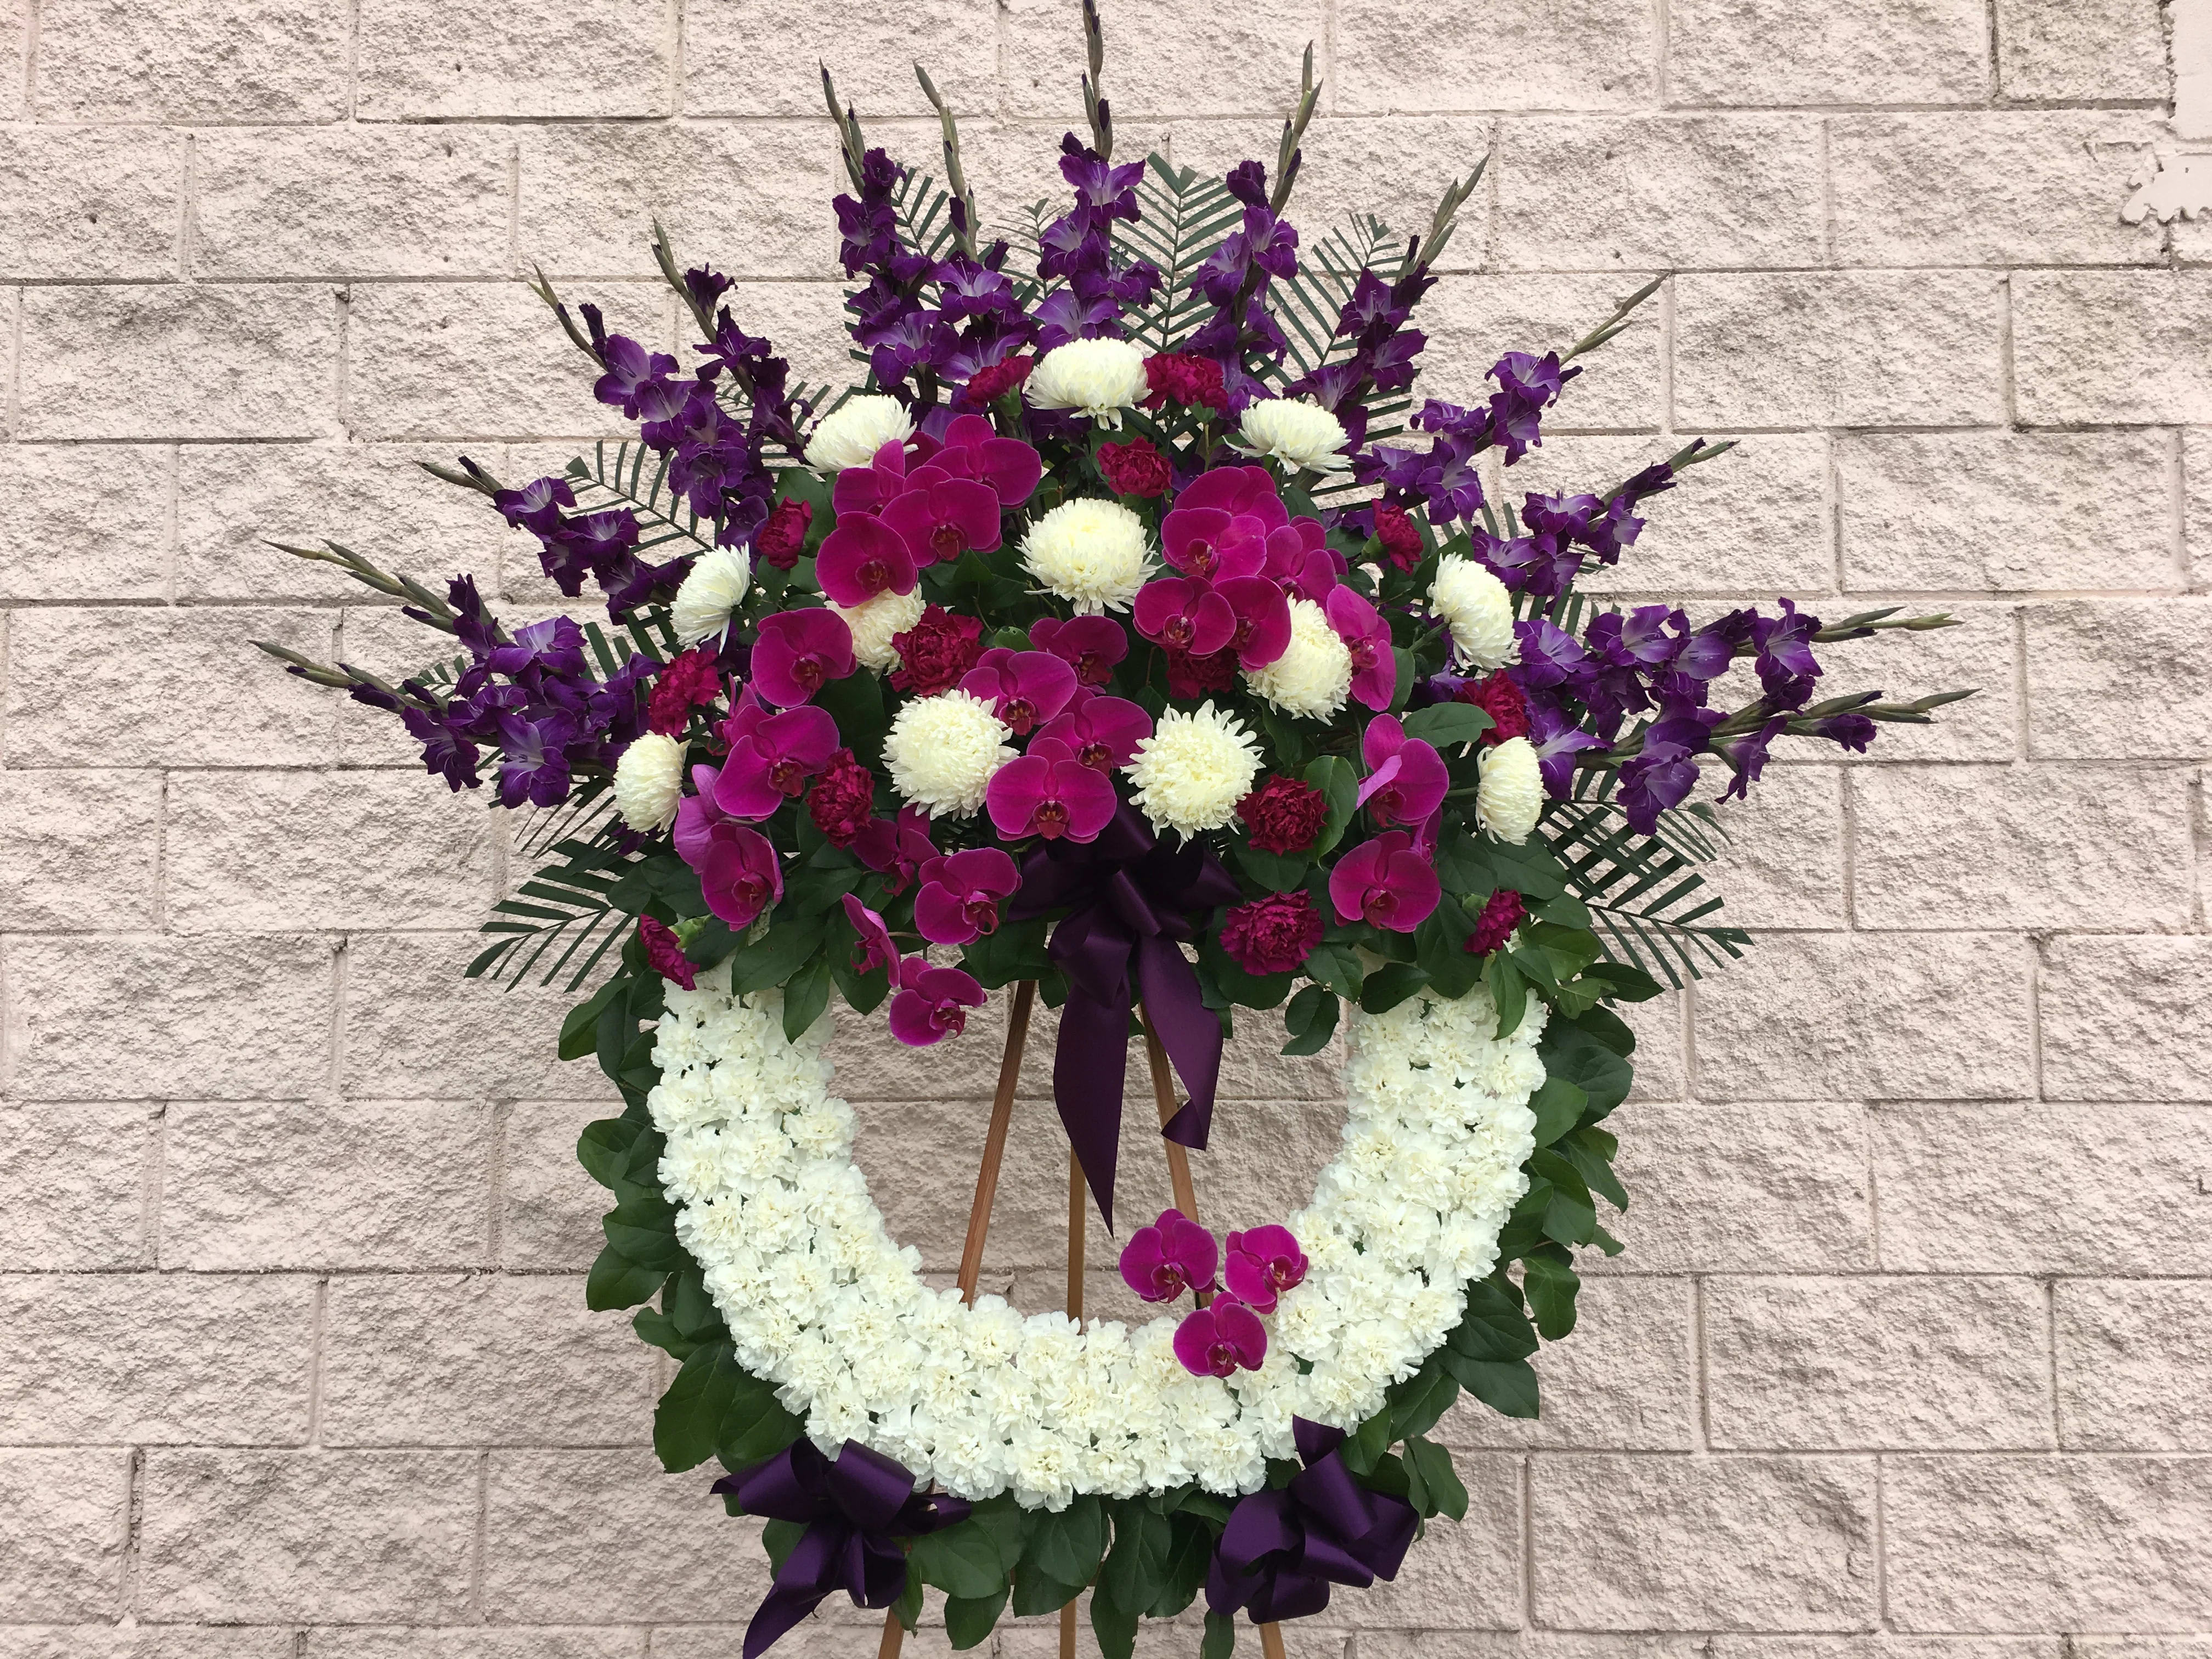 Phalaenopsis Japanese Wreath - The traditional wreath with a white carnation ring, white china mum, dark purple gladiolas, purple carnations and purple phalaenopsis orchids. 